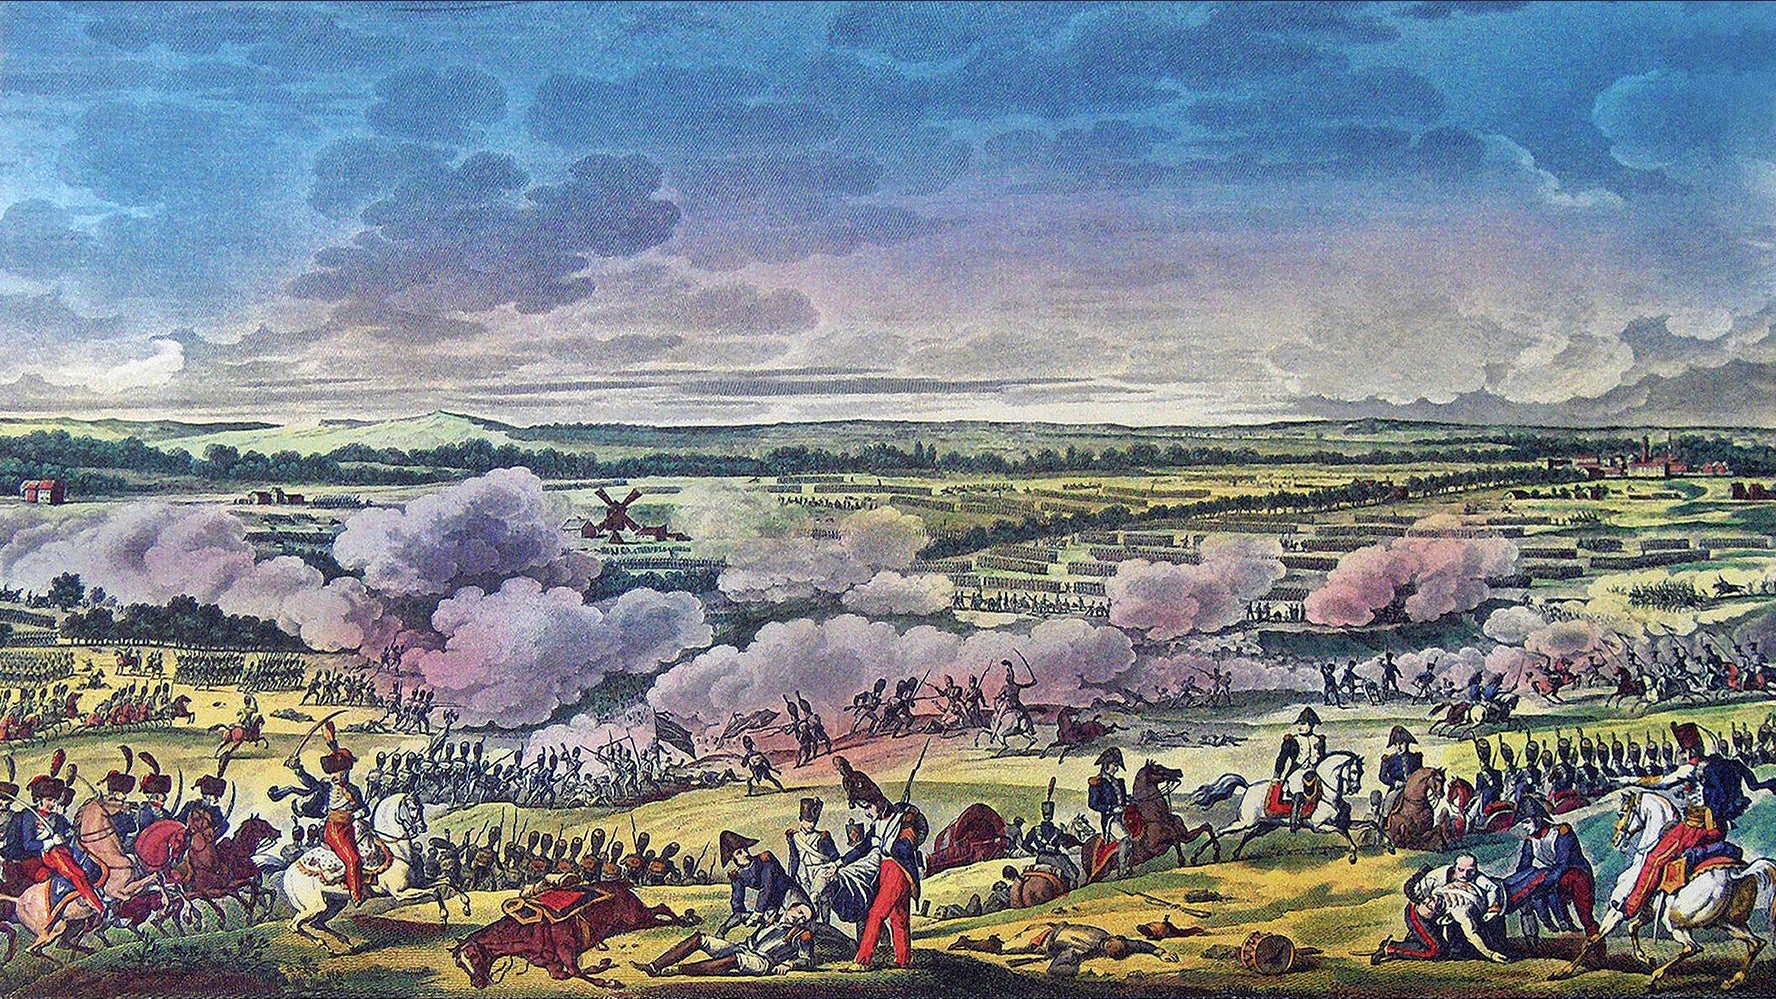 The June 18, 1815, Battle of Waterloo is depicted in this lithograph. (Credit: Wikimedia Commons)